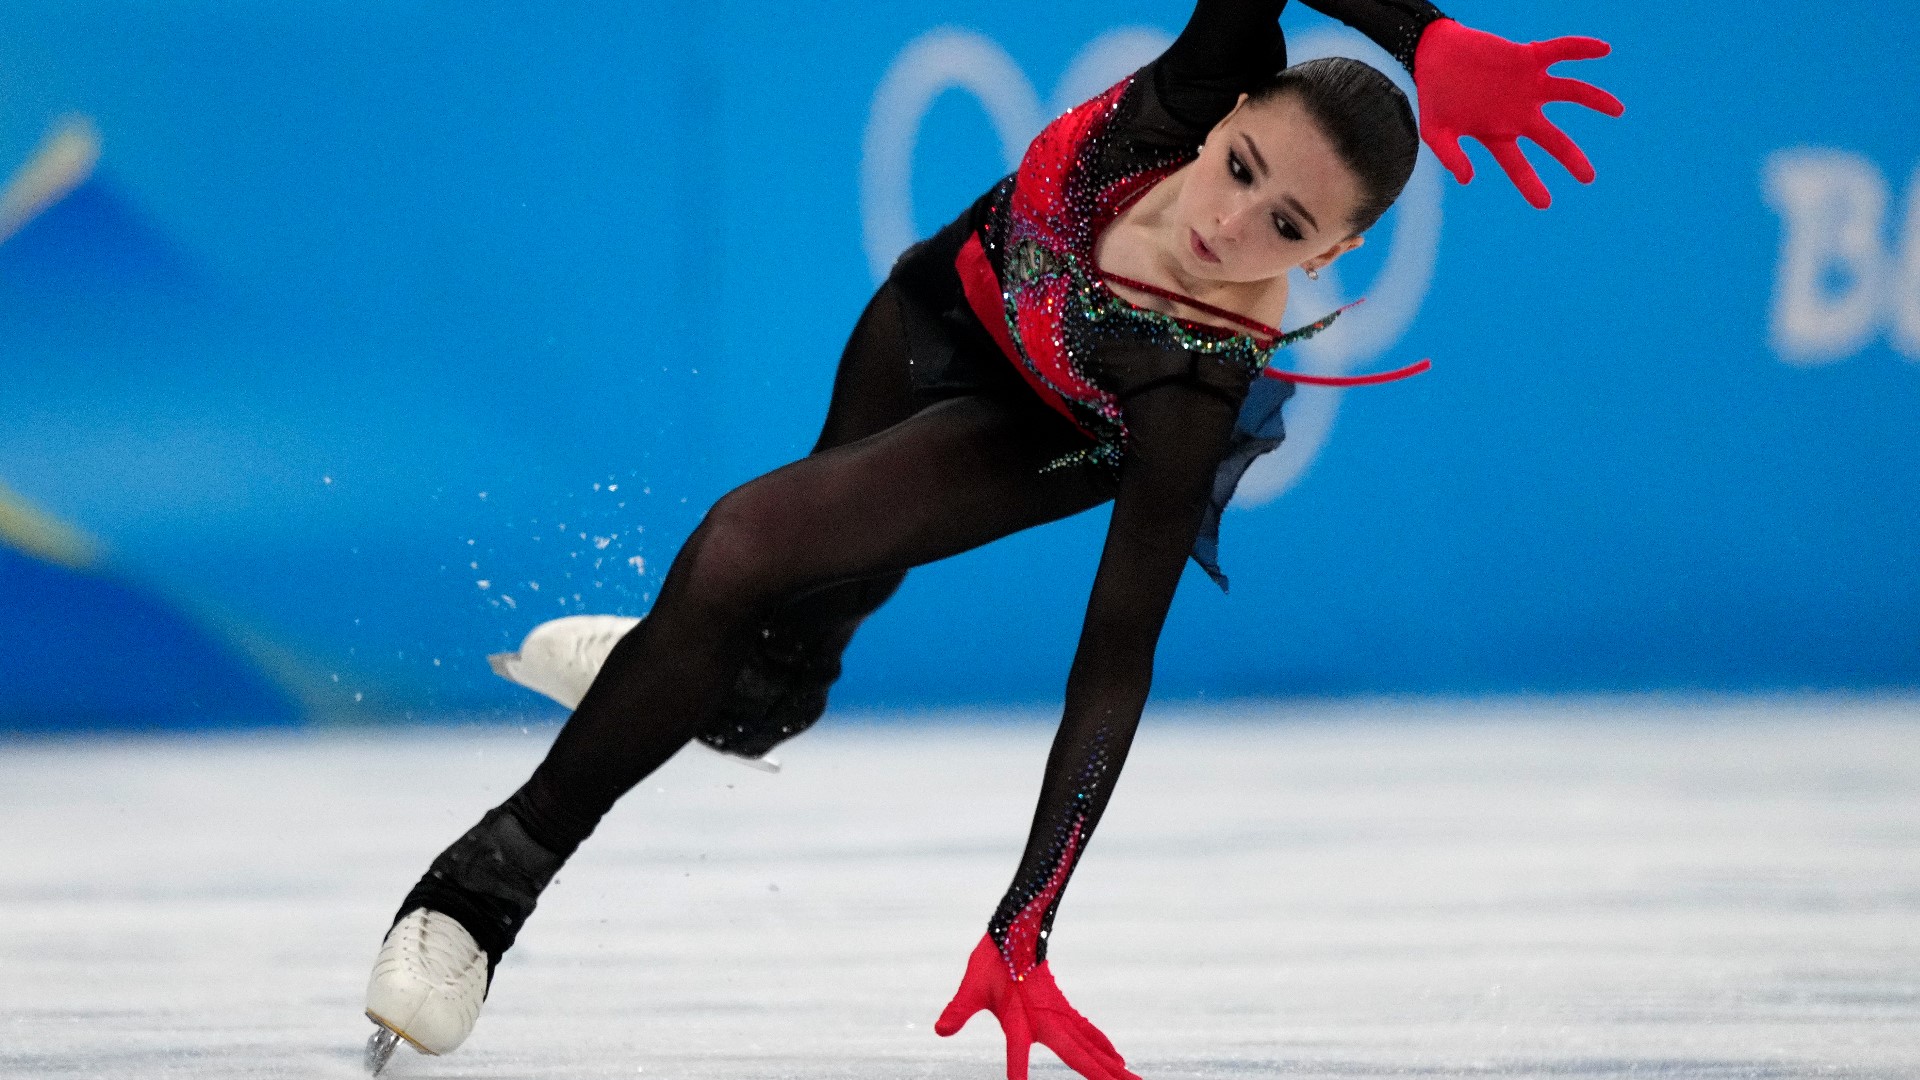 The change was coming even before the controversy surrounding 15-year-old Kamila Valieva at this year's Winter Olympics.